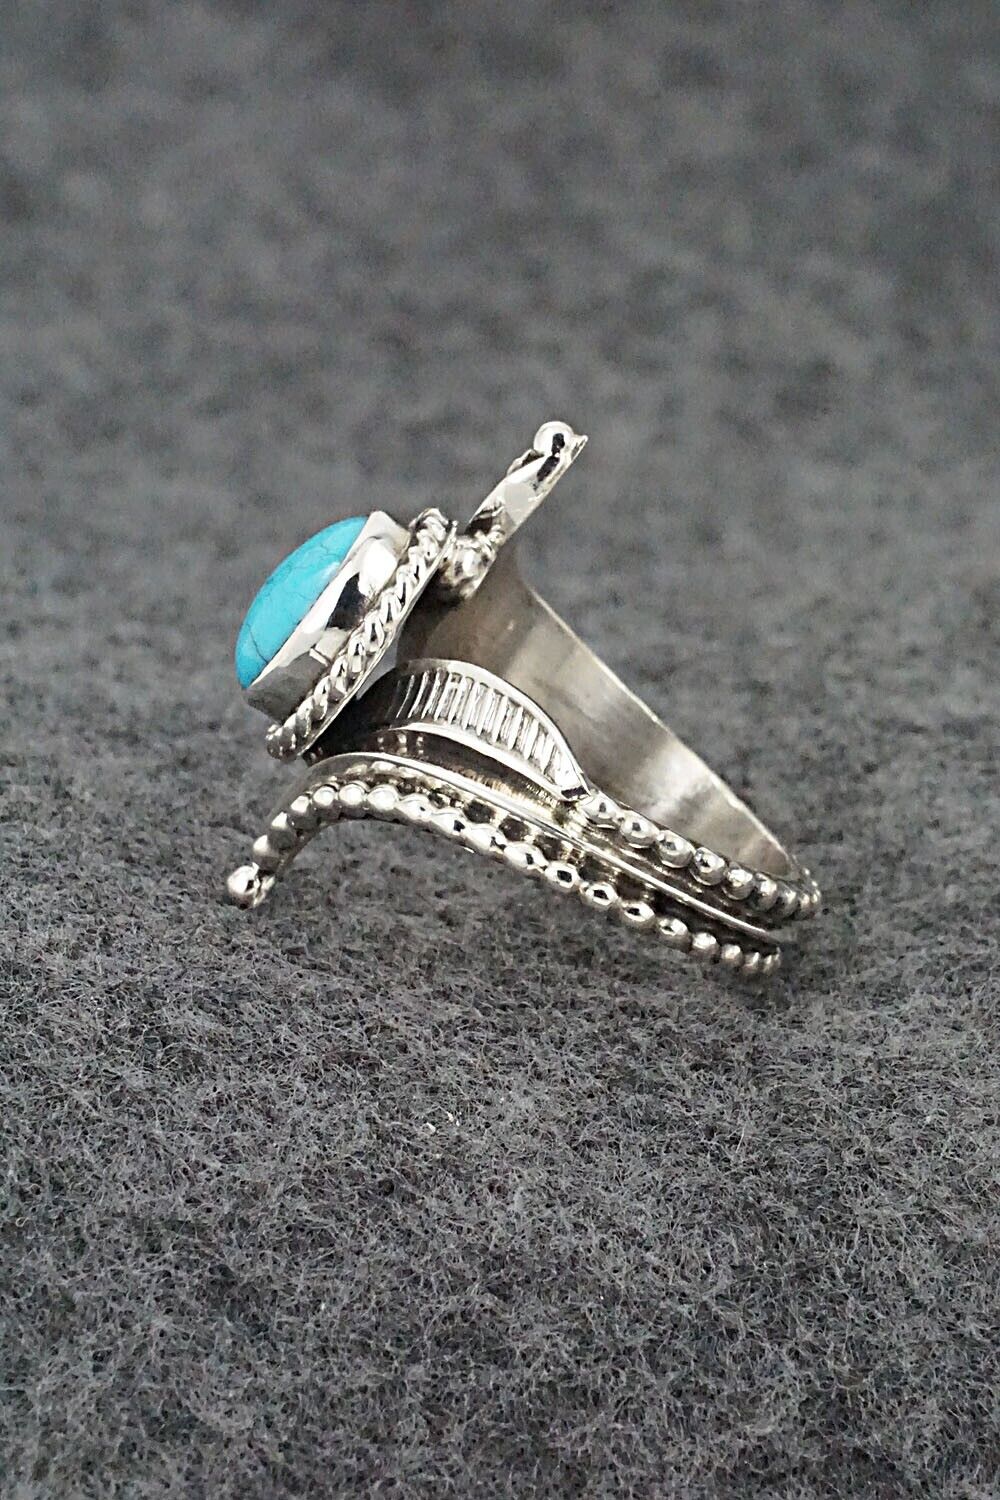 Turquoise & Sterling Silver Ring - Thomas Yazzie - Size 8